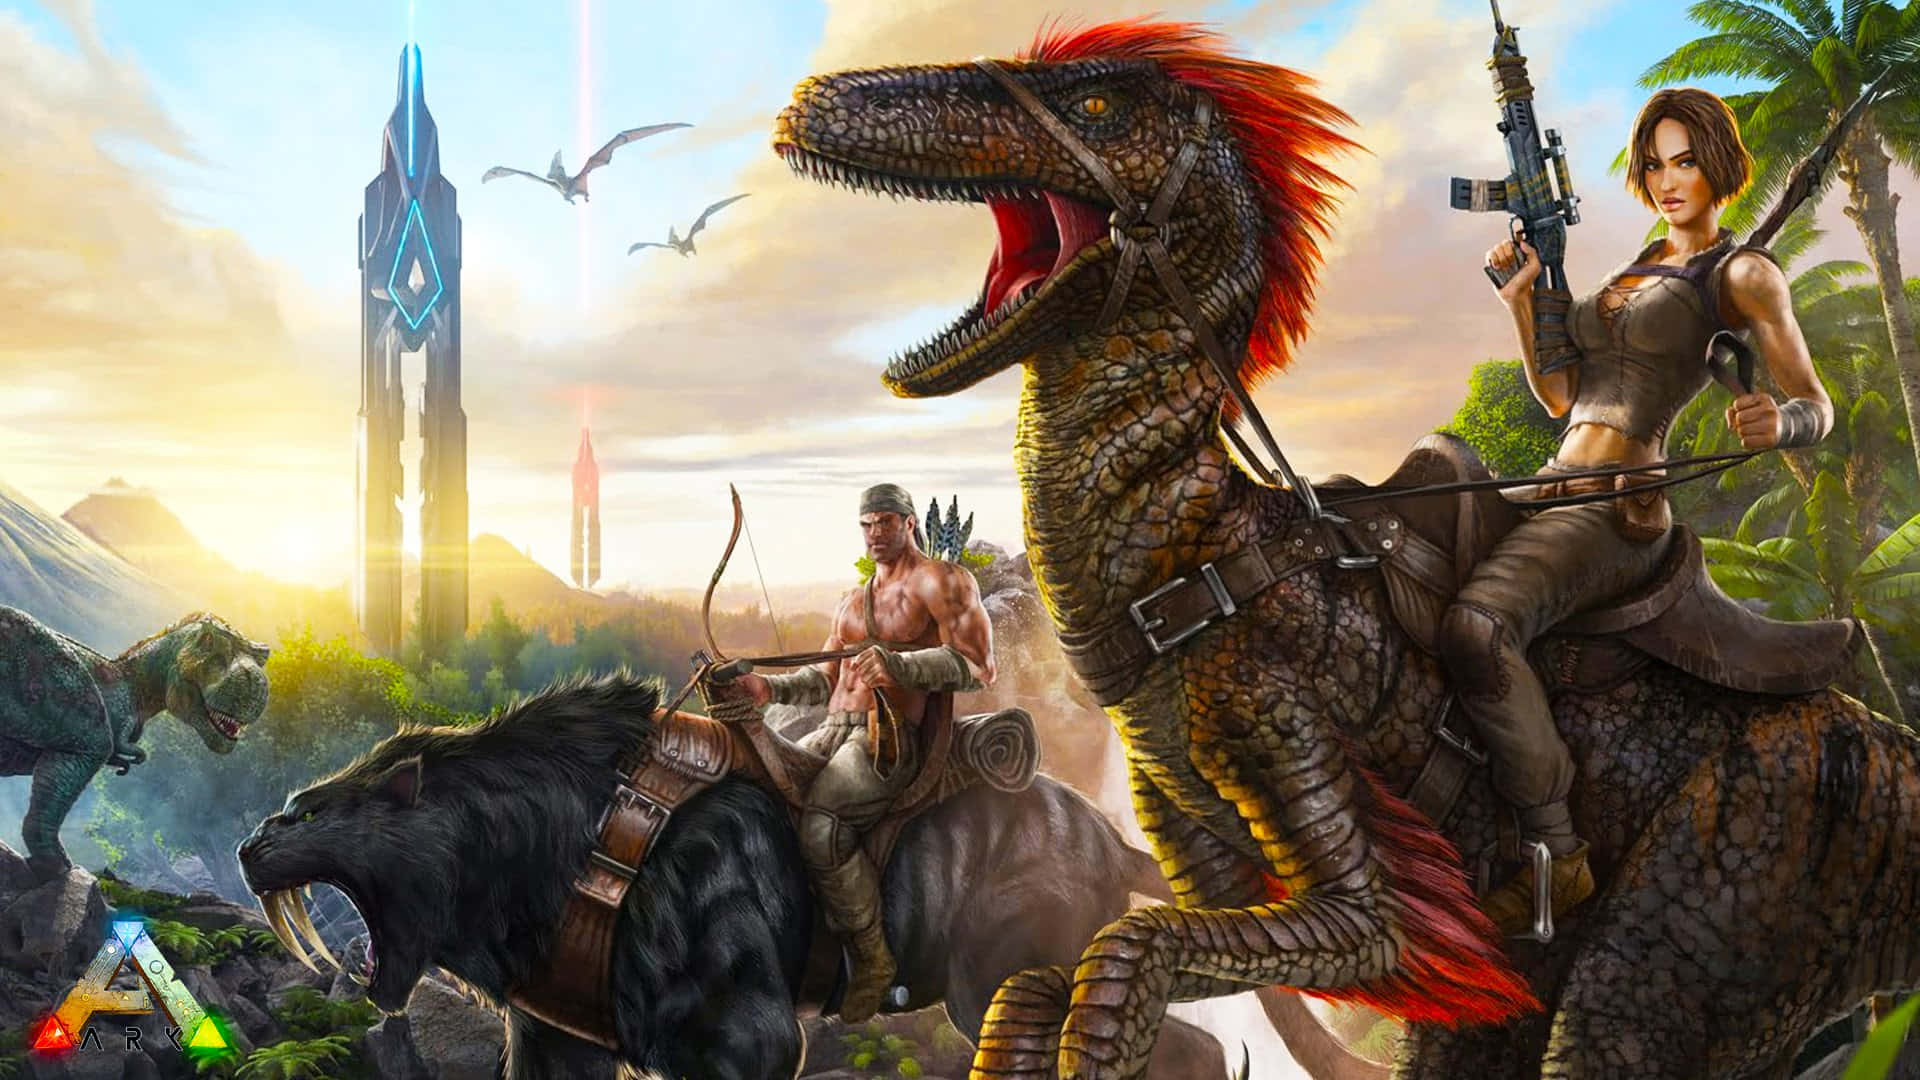 A Woman And A Man Riding Dinosaurs In A Game Wallpaper